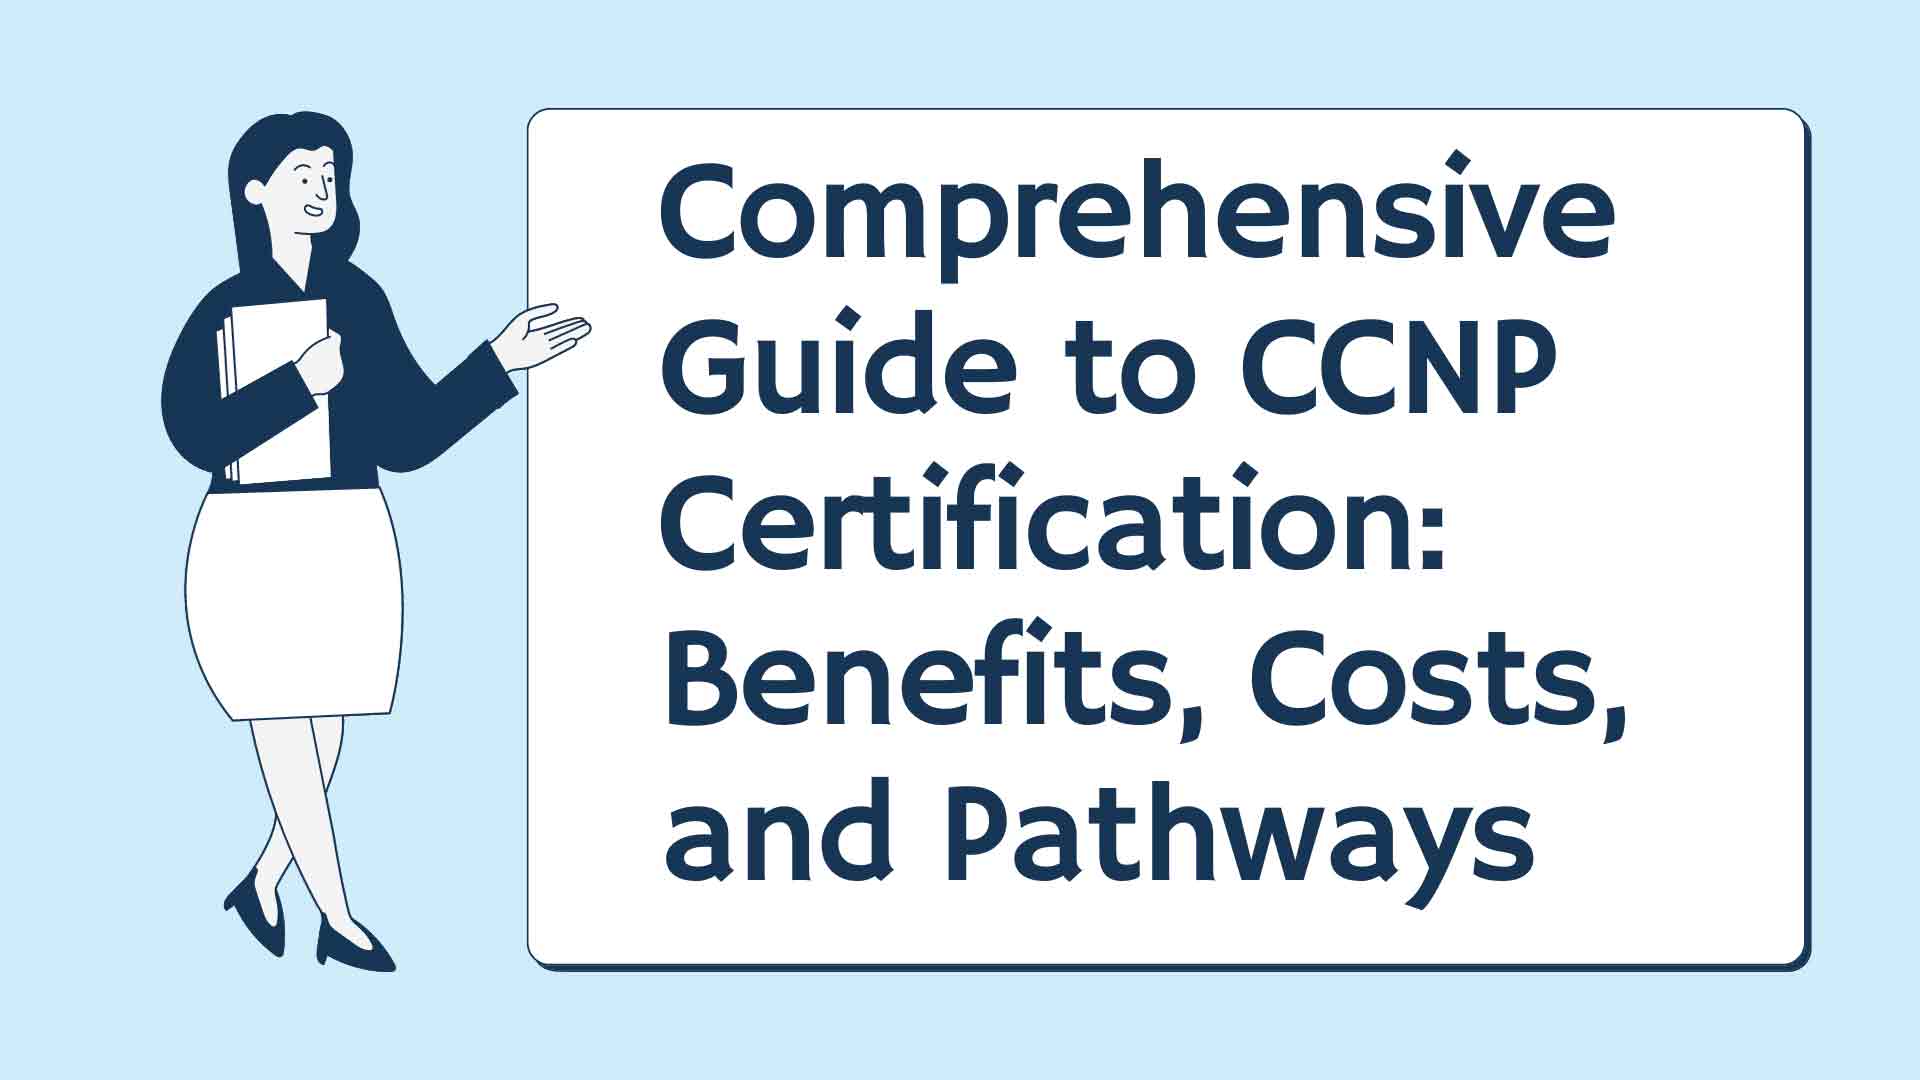 Comprehensive Guide to CCNP Certification